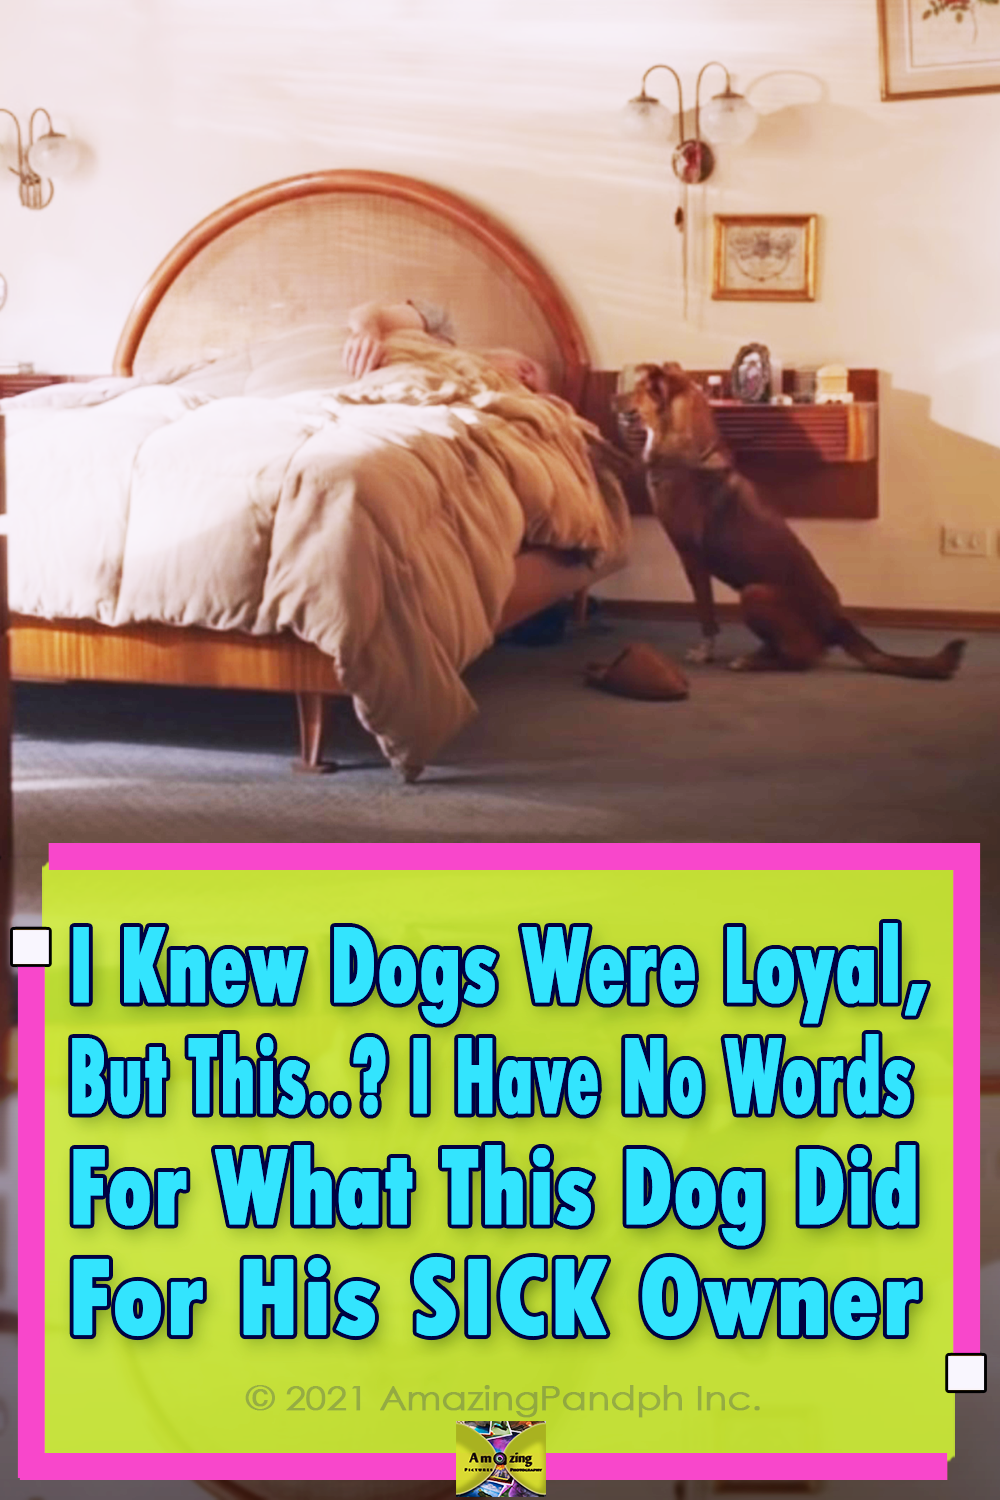 organ donation, dogs, relationship, emotional, best story, best ad,